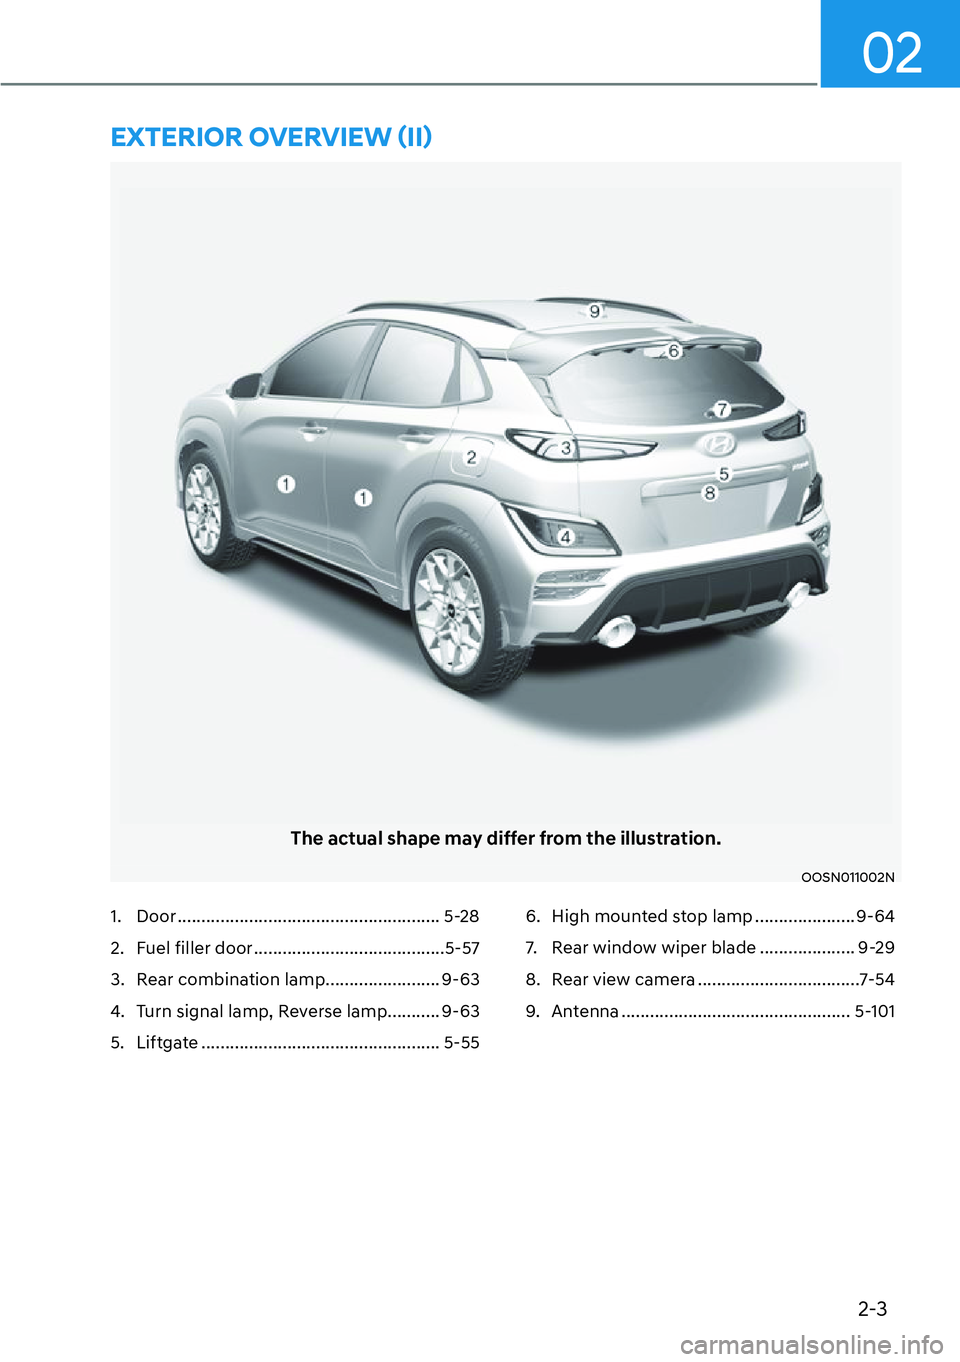 HYUNDAI KONA 2023  Owners Manual 2-3
02
The actual shape may differ from the illustration.
OOSN011002N
�(�;�7�(�5�,�2�5��2�9�(�5�9�,�(�:�